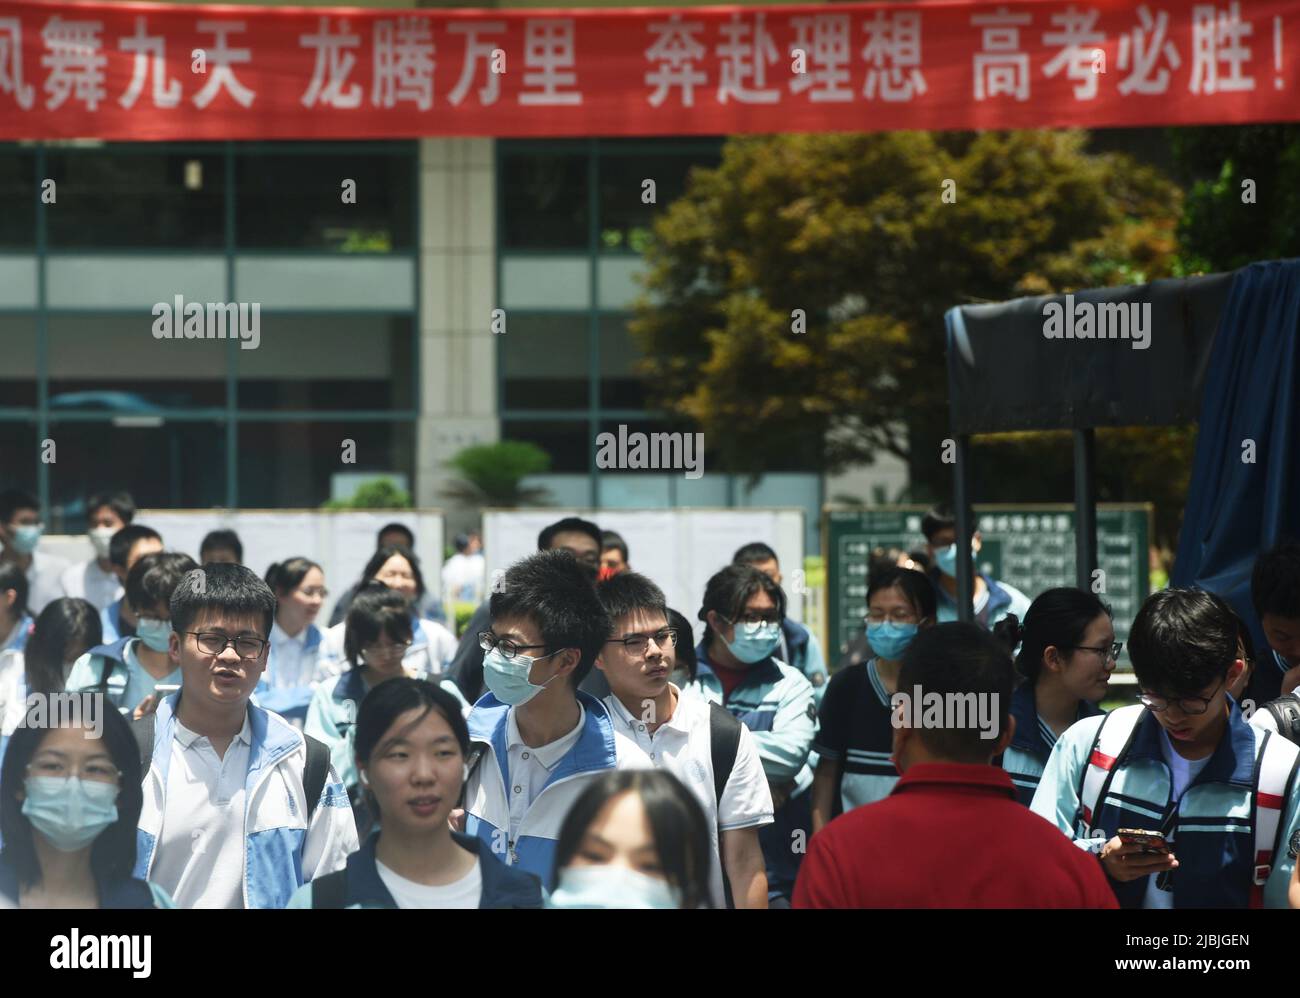 HANGZHOU, CHINA - JUNE 7, 2022 - Students walk out of hangzhou No. 14 Middle School after finishing the first Chinese test of the 2022 national colleg Stock Photo